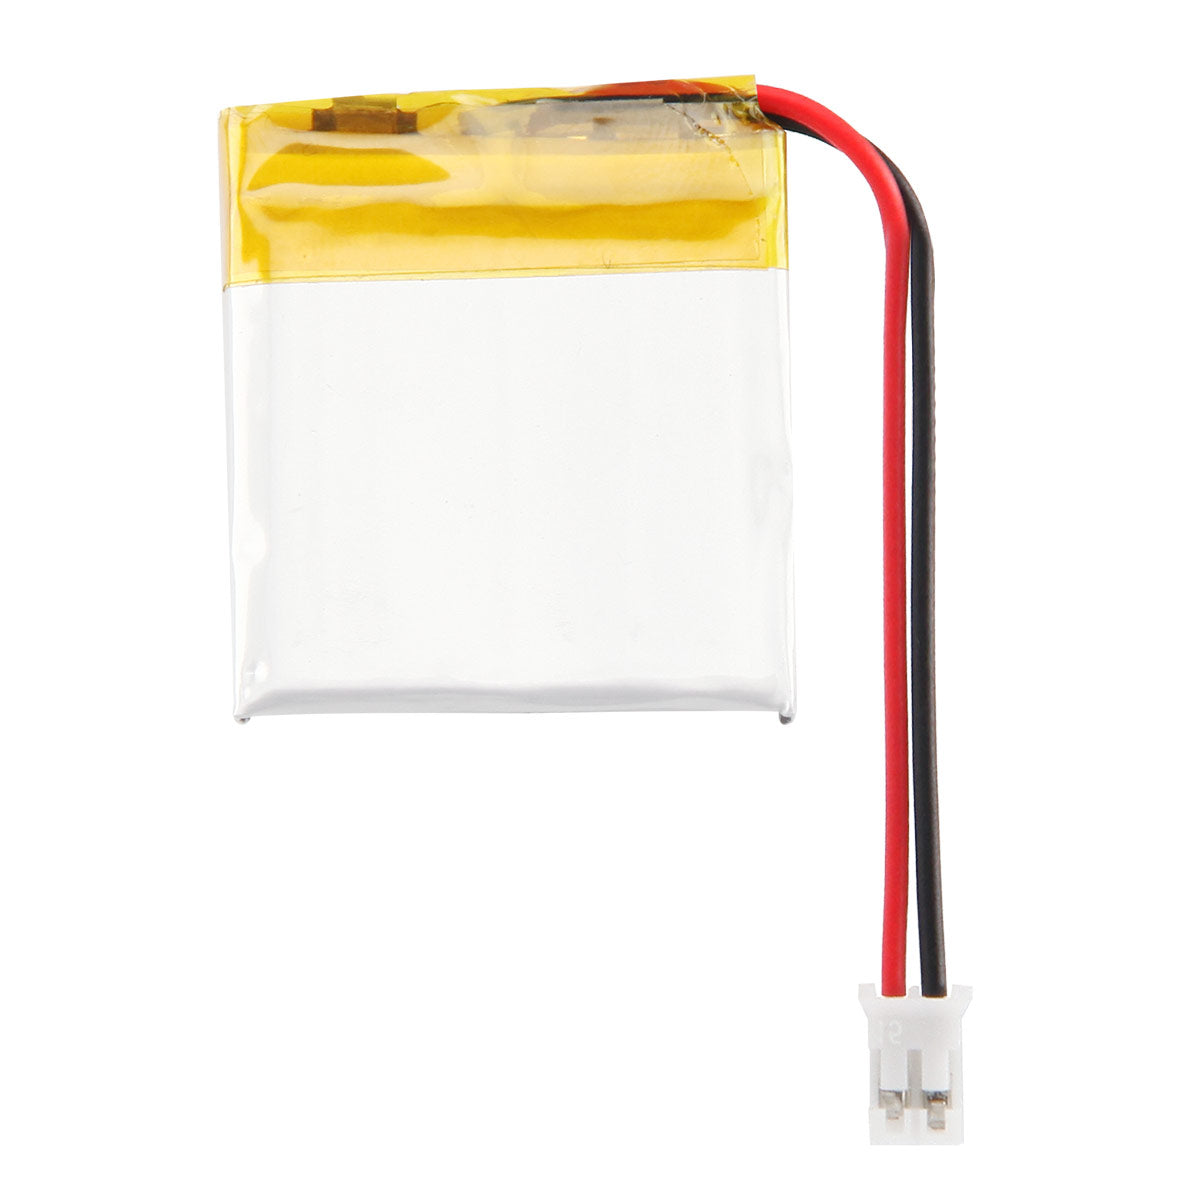 YDL 3.7V 360mAh 502728 Rechargeable Lithium  Polymer Battery Length 30mm